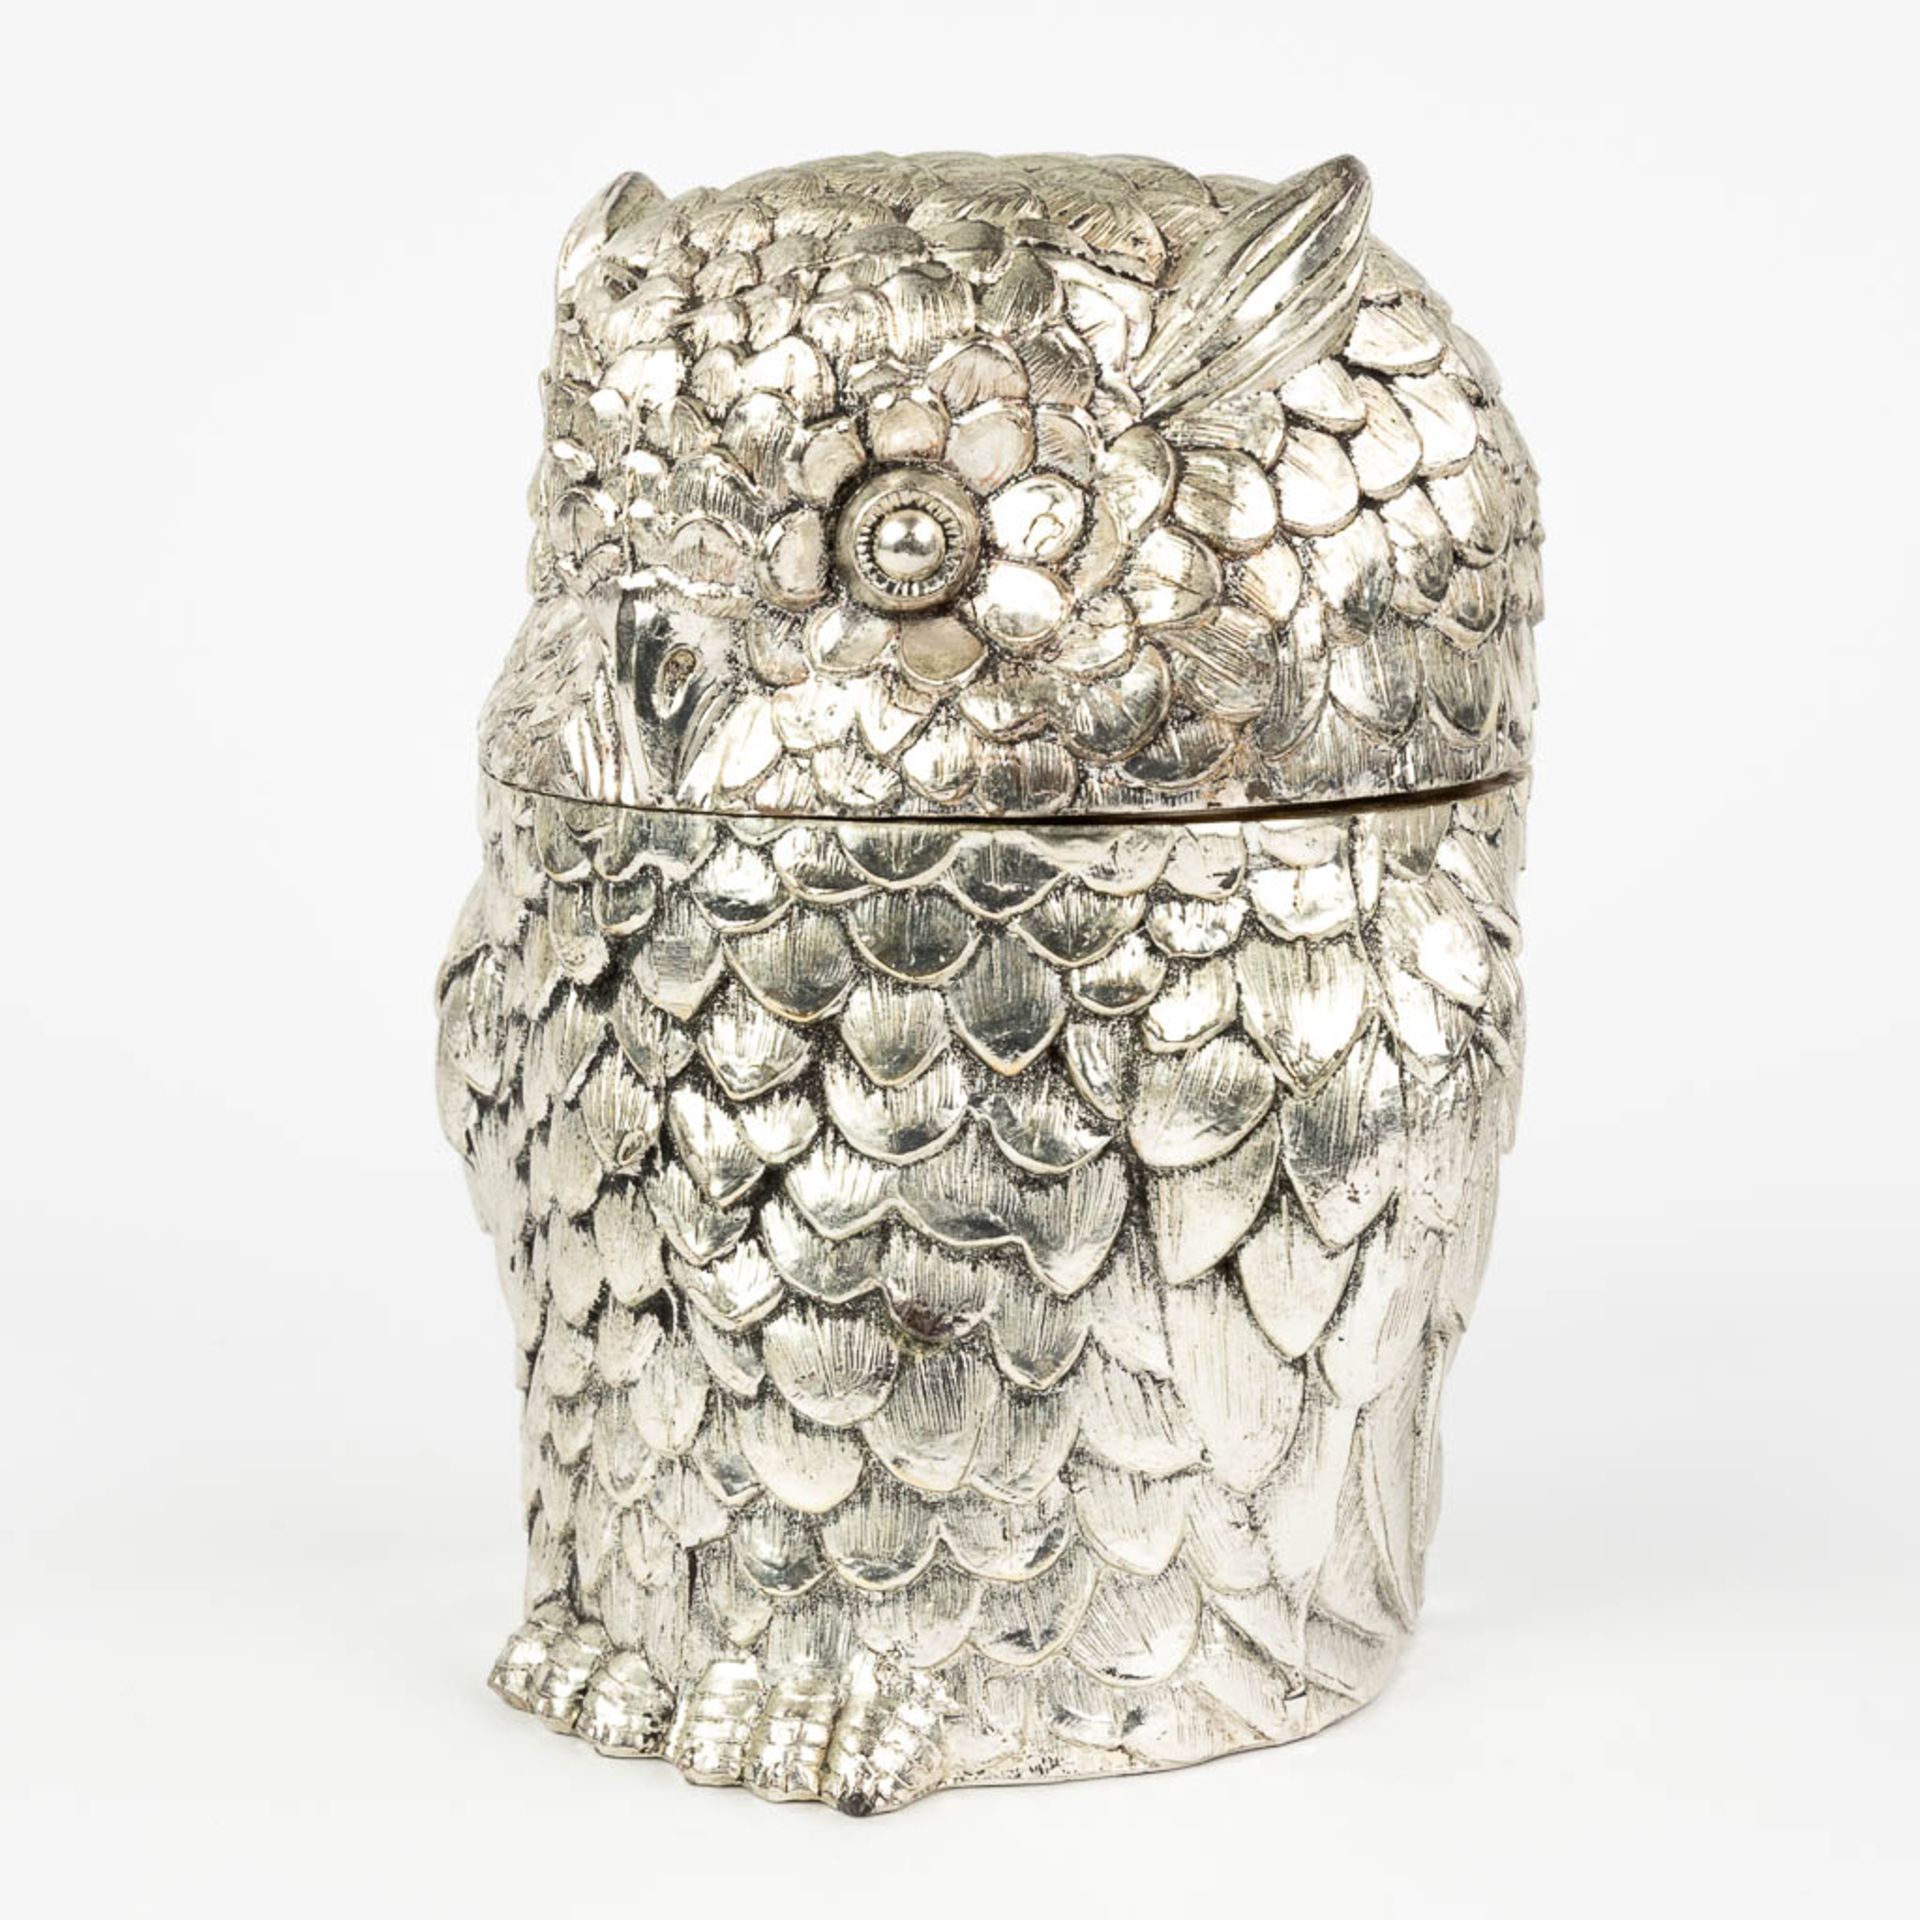 Mauro MANETTI (1946) 'Owl' a mid-century ice-pail. (W:15 x H:20 cm) - Image 5 of 12